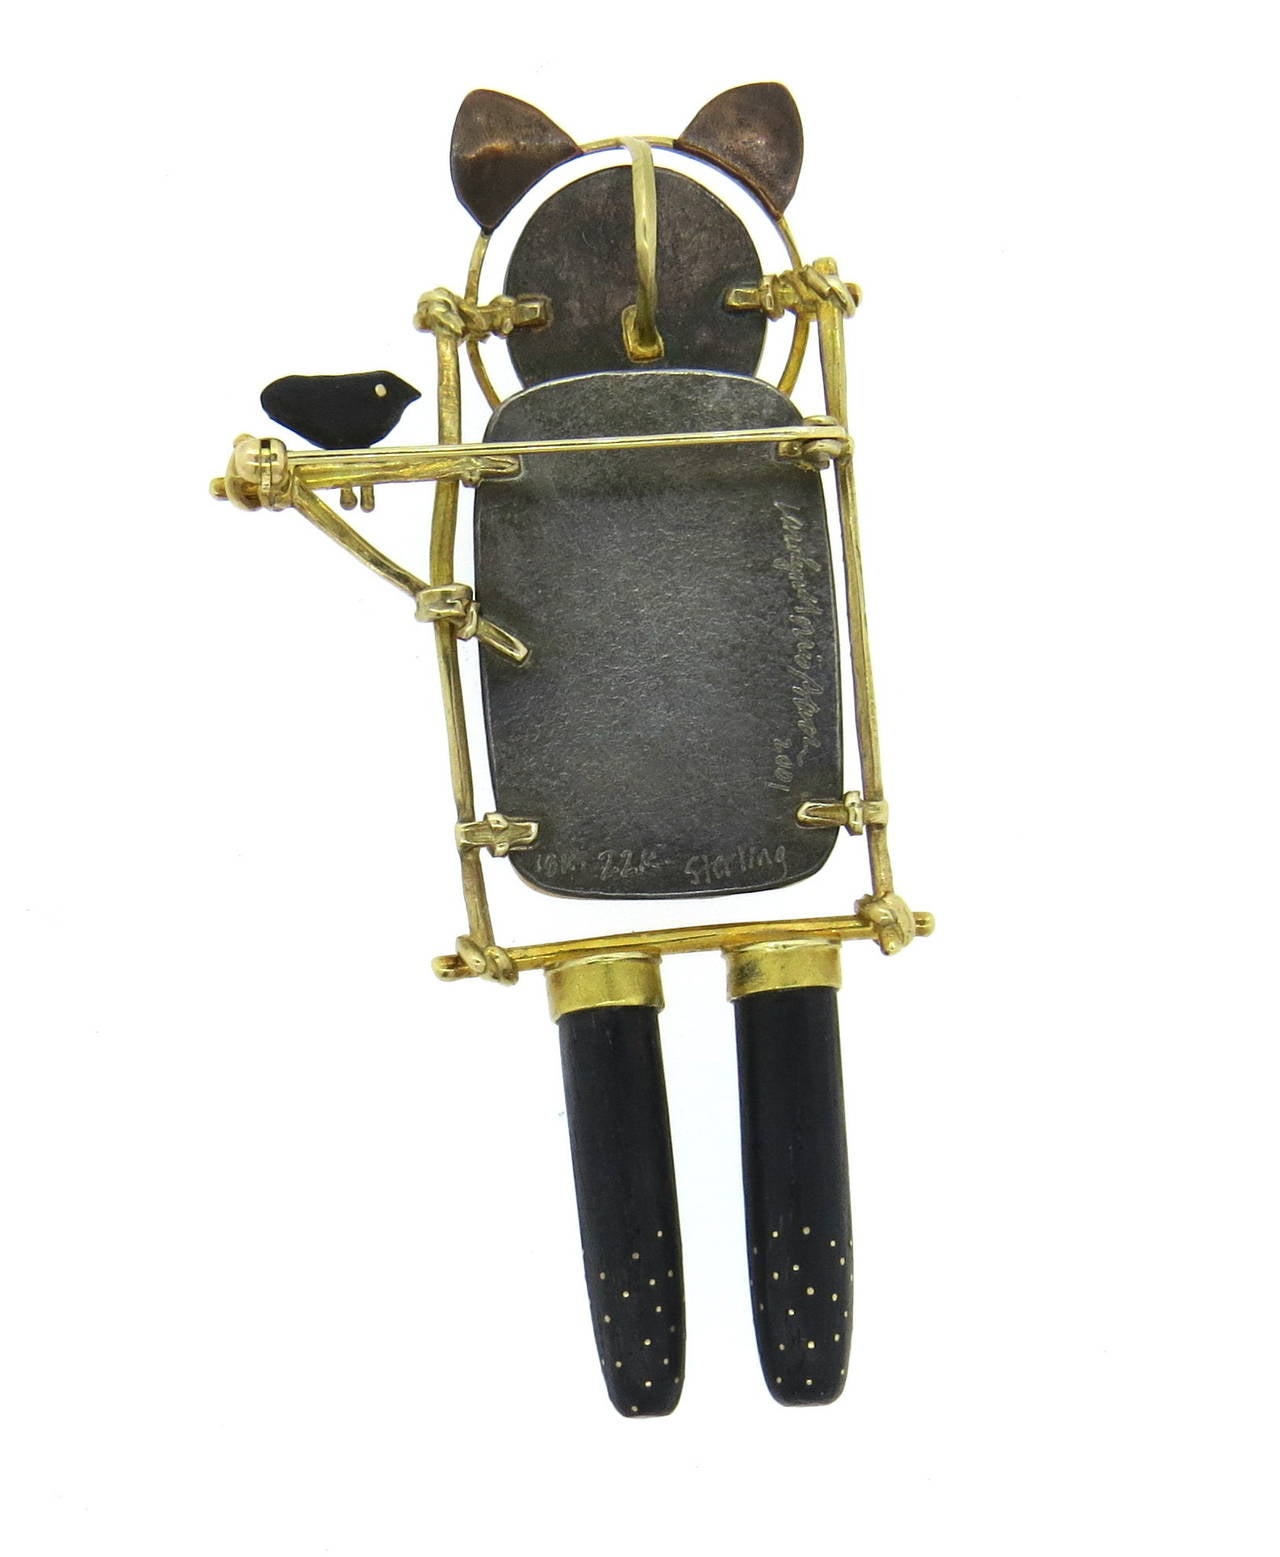 Unusual brooch pendant by Carolyn Morris Bach, set in sterling silver,18k and 22k gold, decorated with cow bone,wood and gemstone. Measures 87mm x 41mm. Marked Carolyn Morris Bach 2001, 18k 22k sterling. Weight of the piece - 28.9 grams